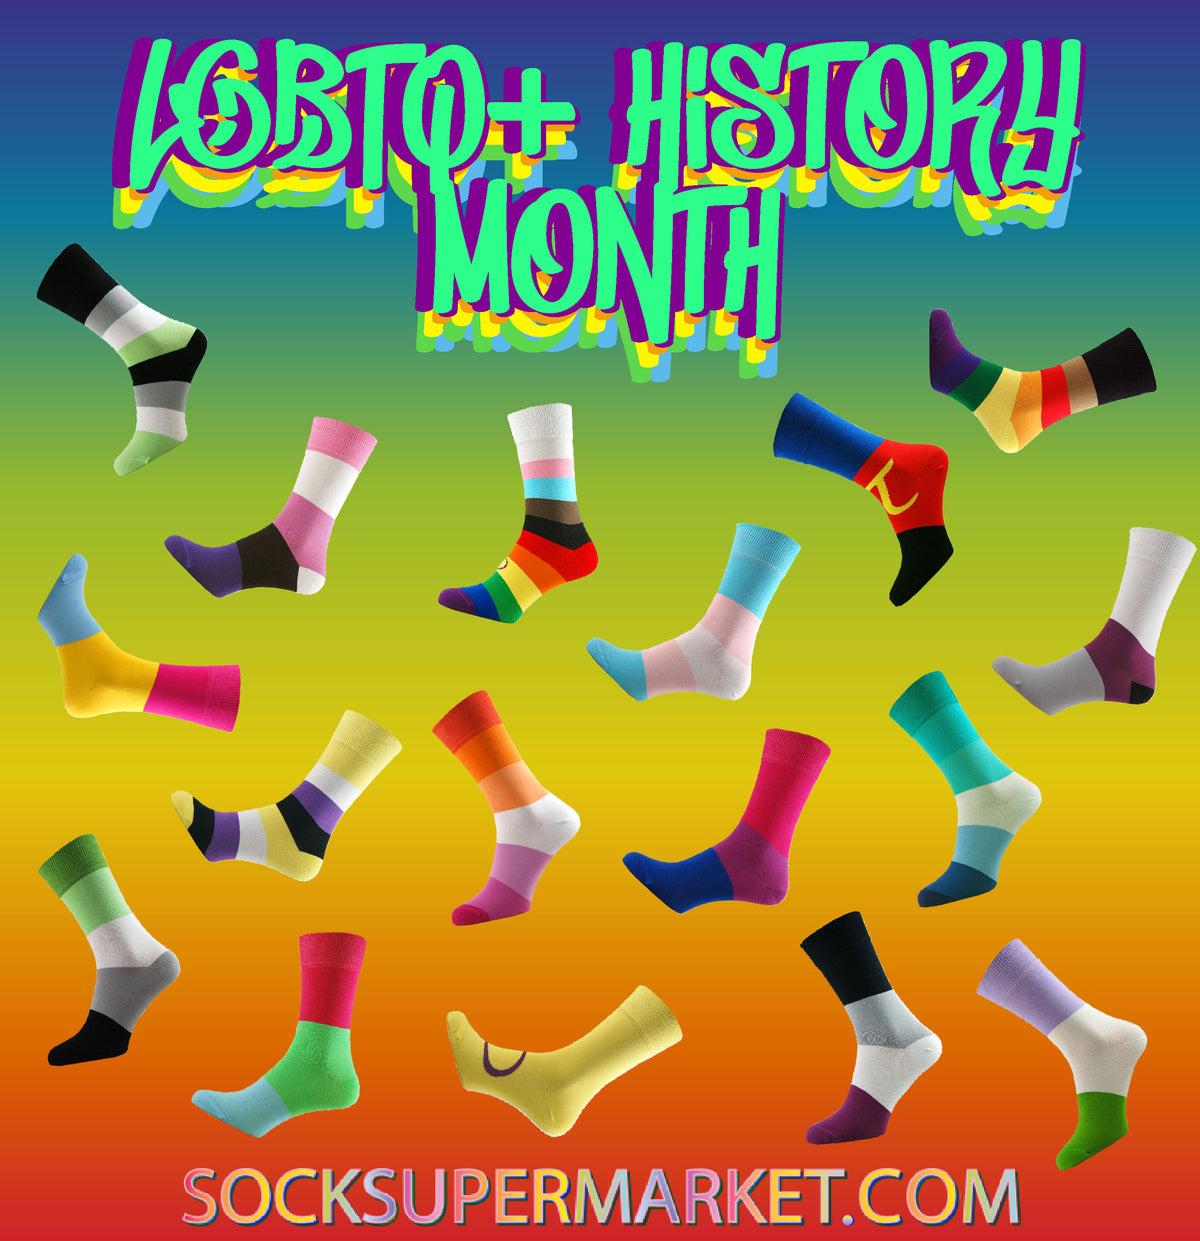 OFFER! 50% Sale off Pride Socks for LGBTQ+ History Month And Free Delivery